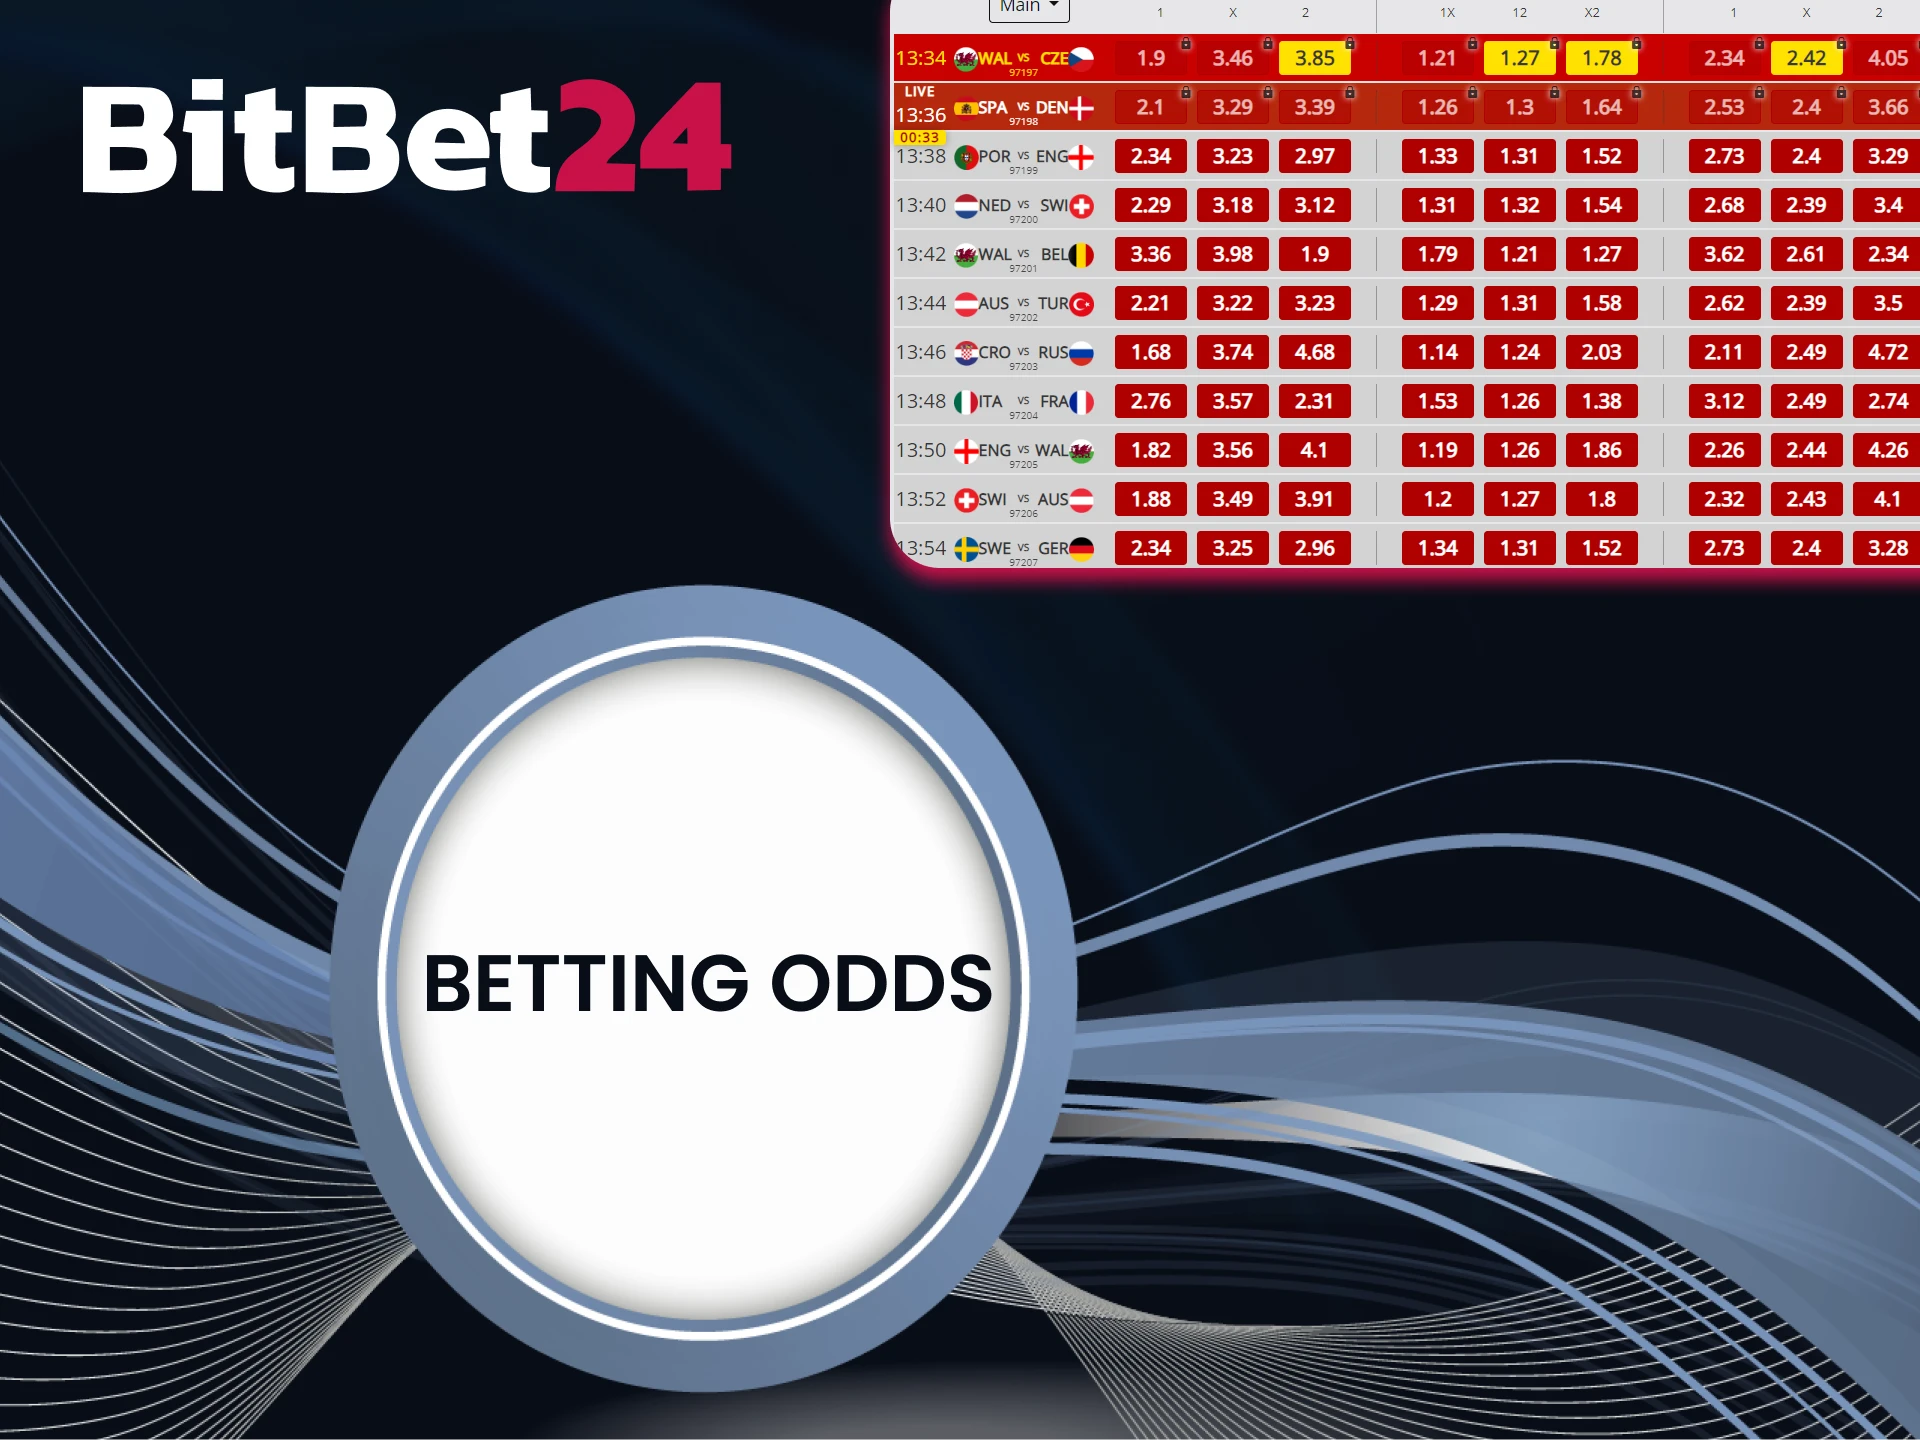 BitBet24 offering the best odds.